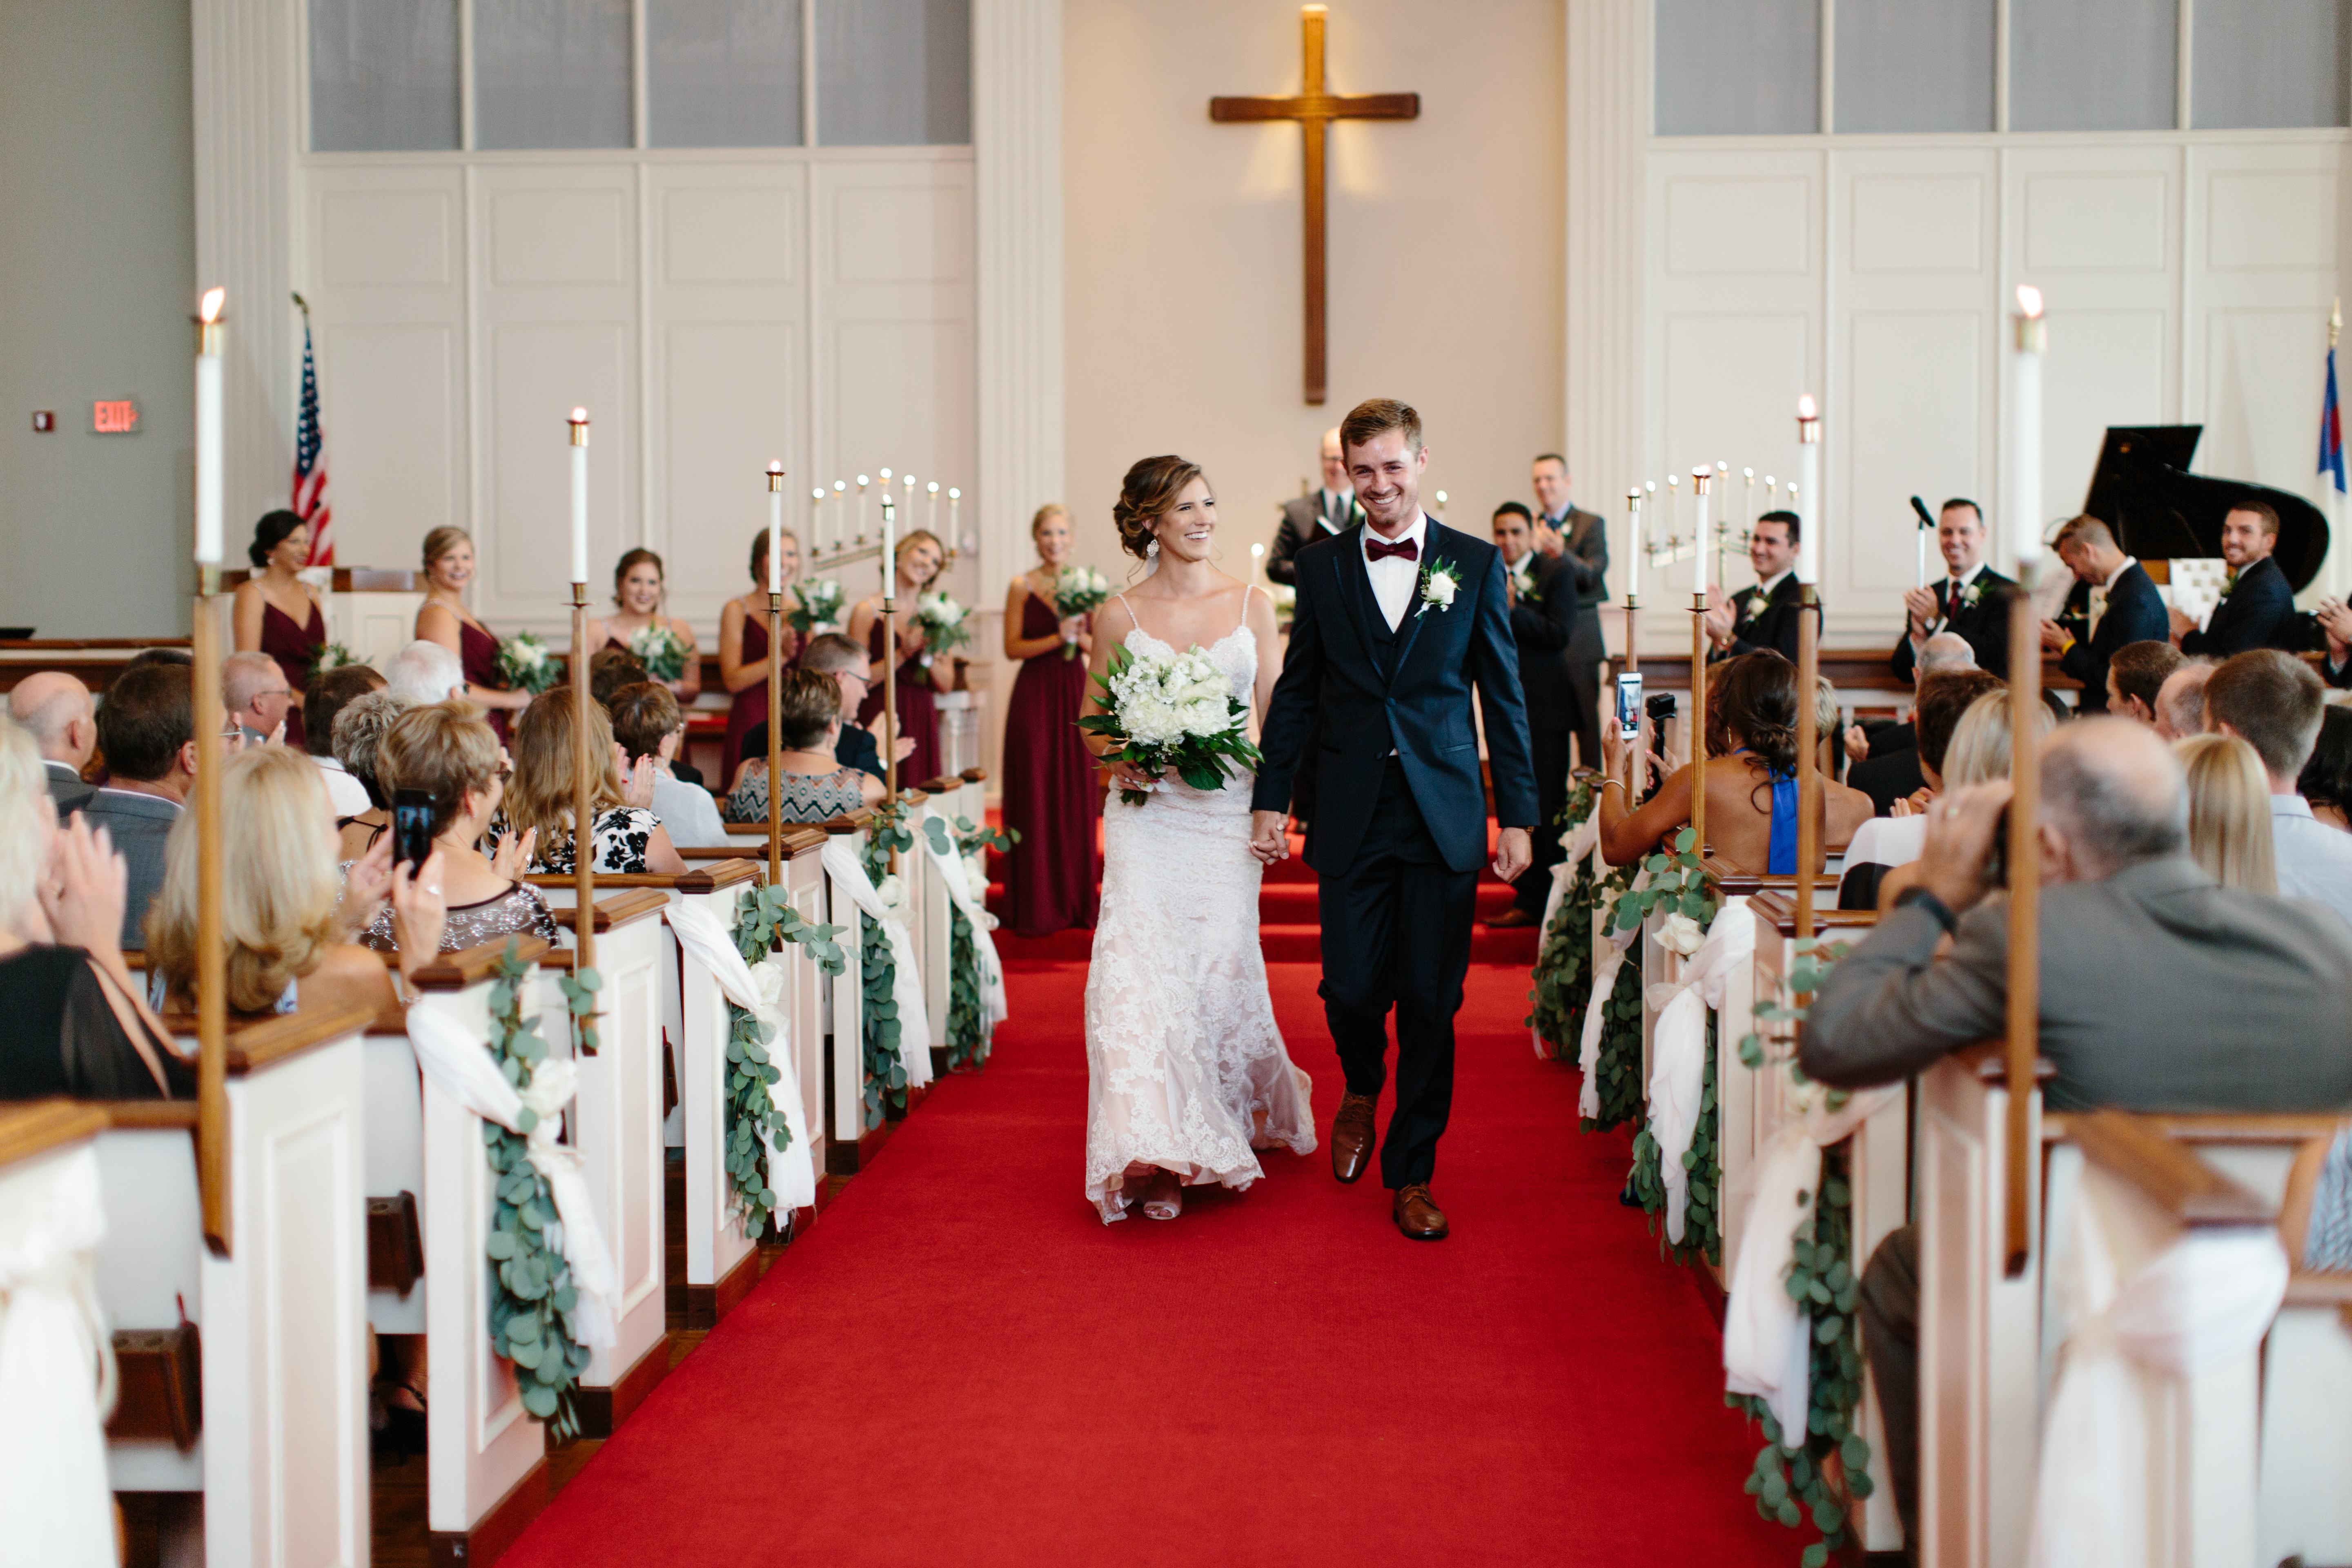 Couple walk down aisle after wedding ceremony